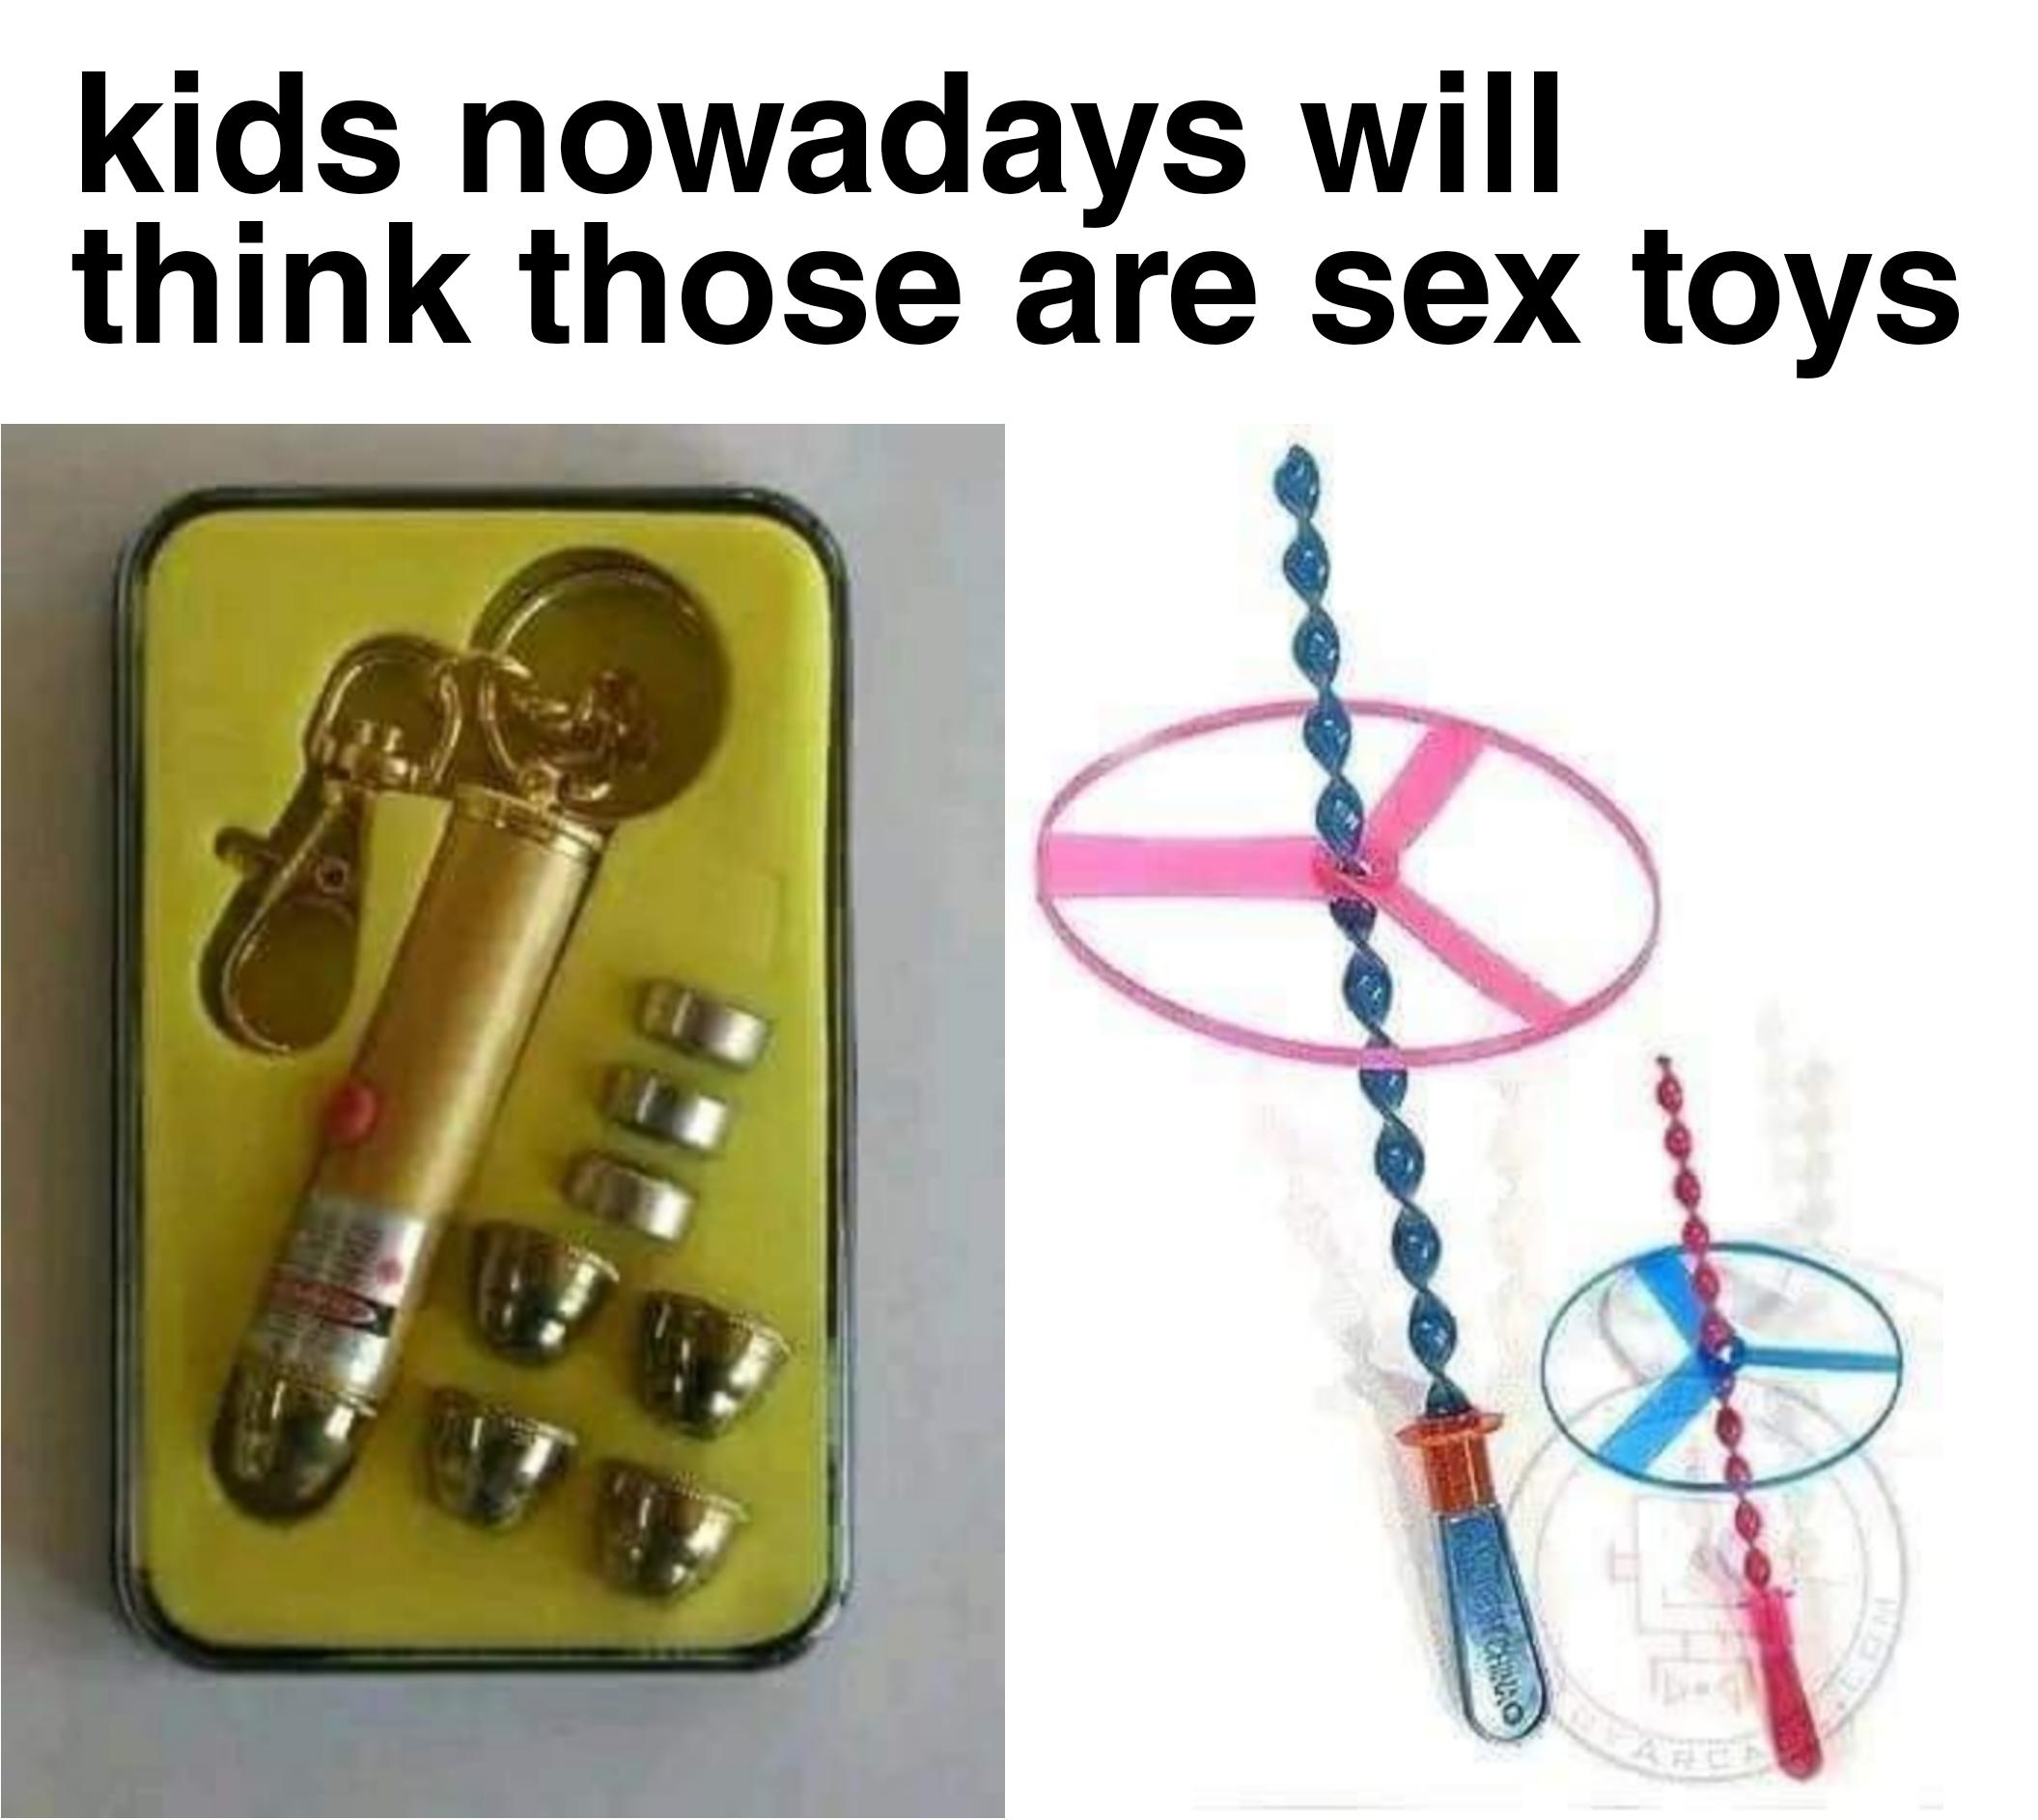 dank memes -  90s laser pointer - kids nowadays will think those are sex toys